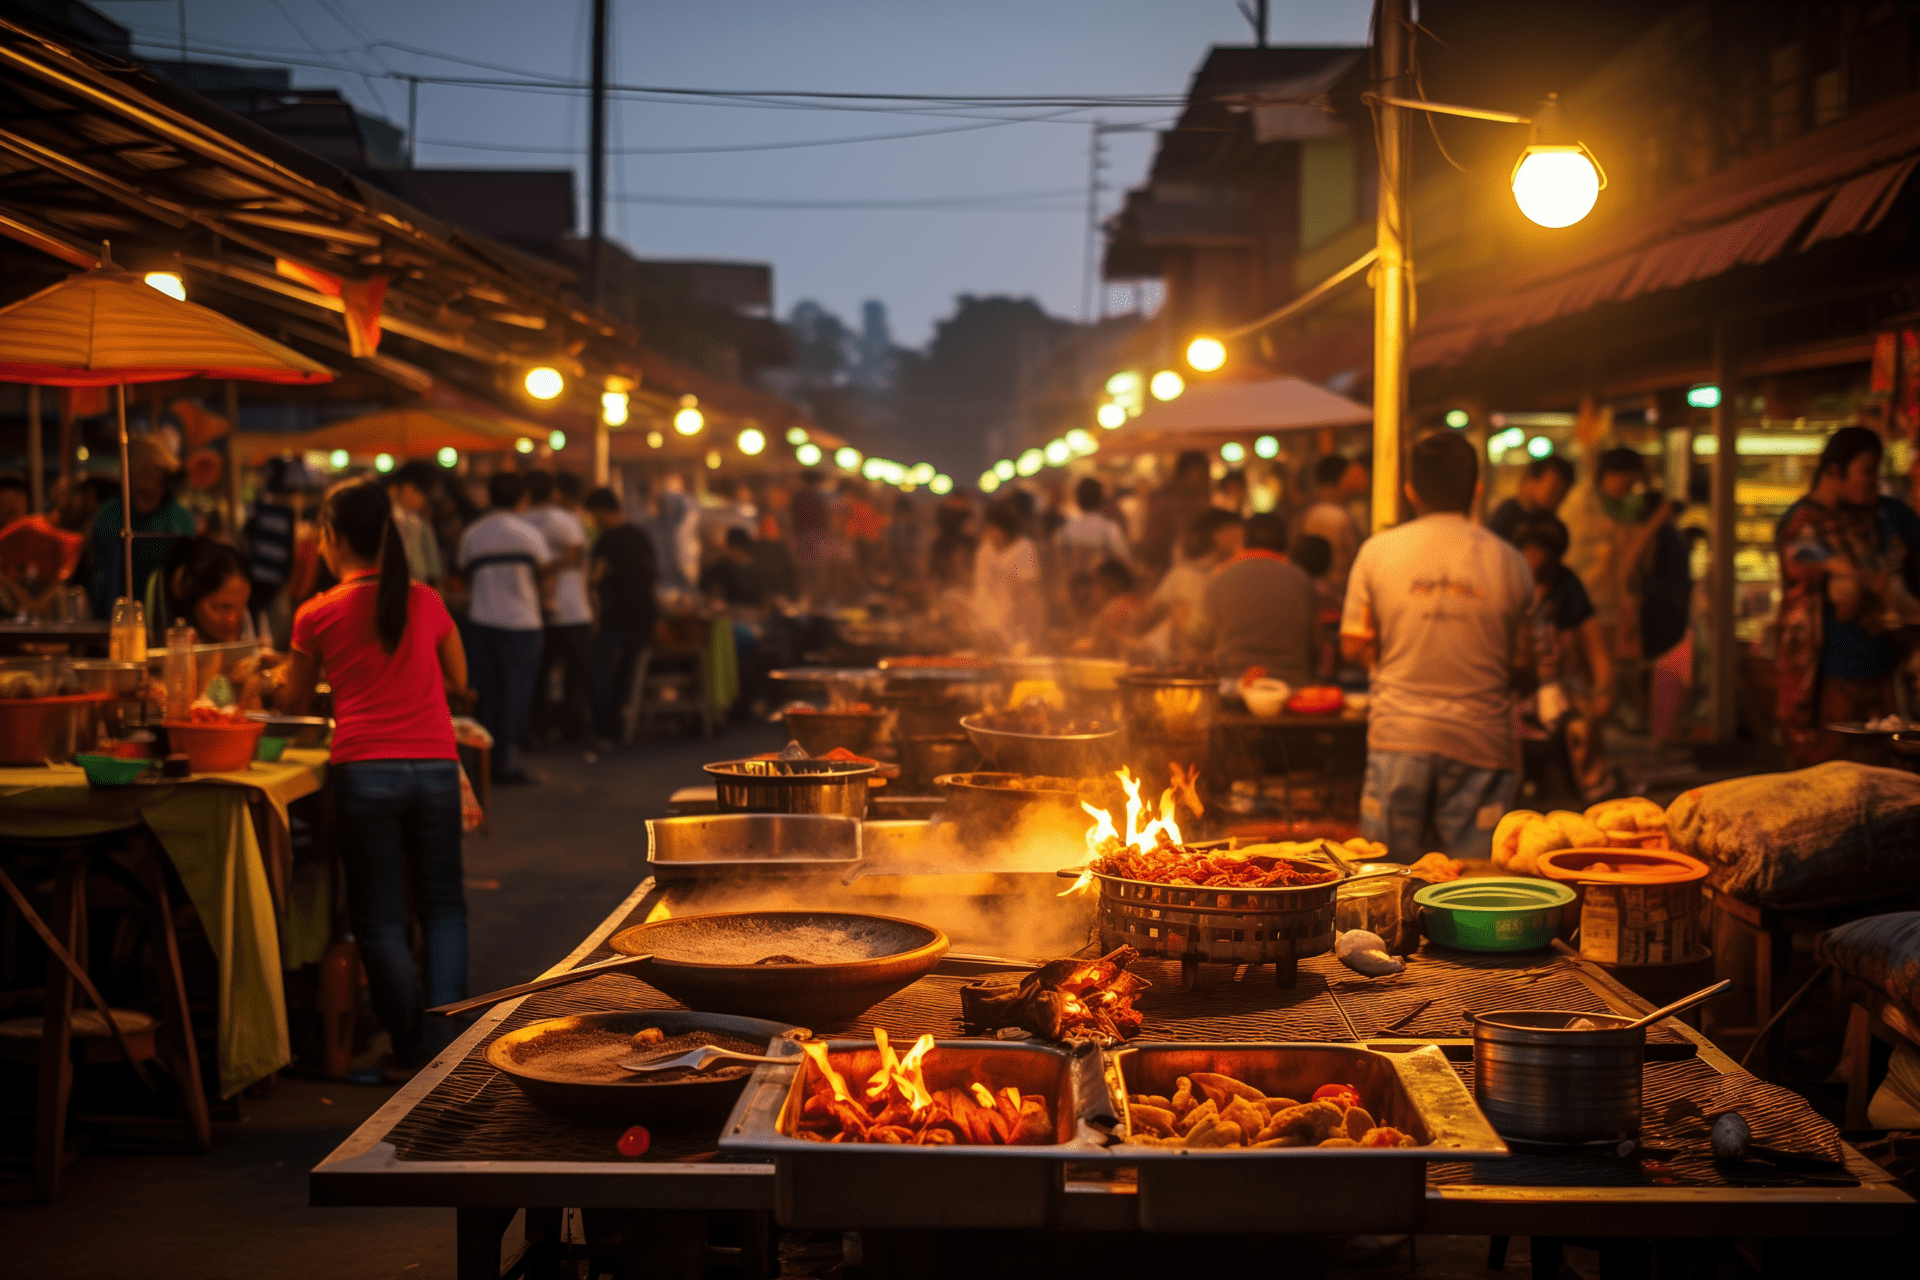 Chiang Mai night market filled with street food stalls selling mouth-watering Northern Thai delicacies